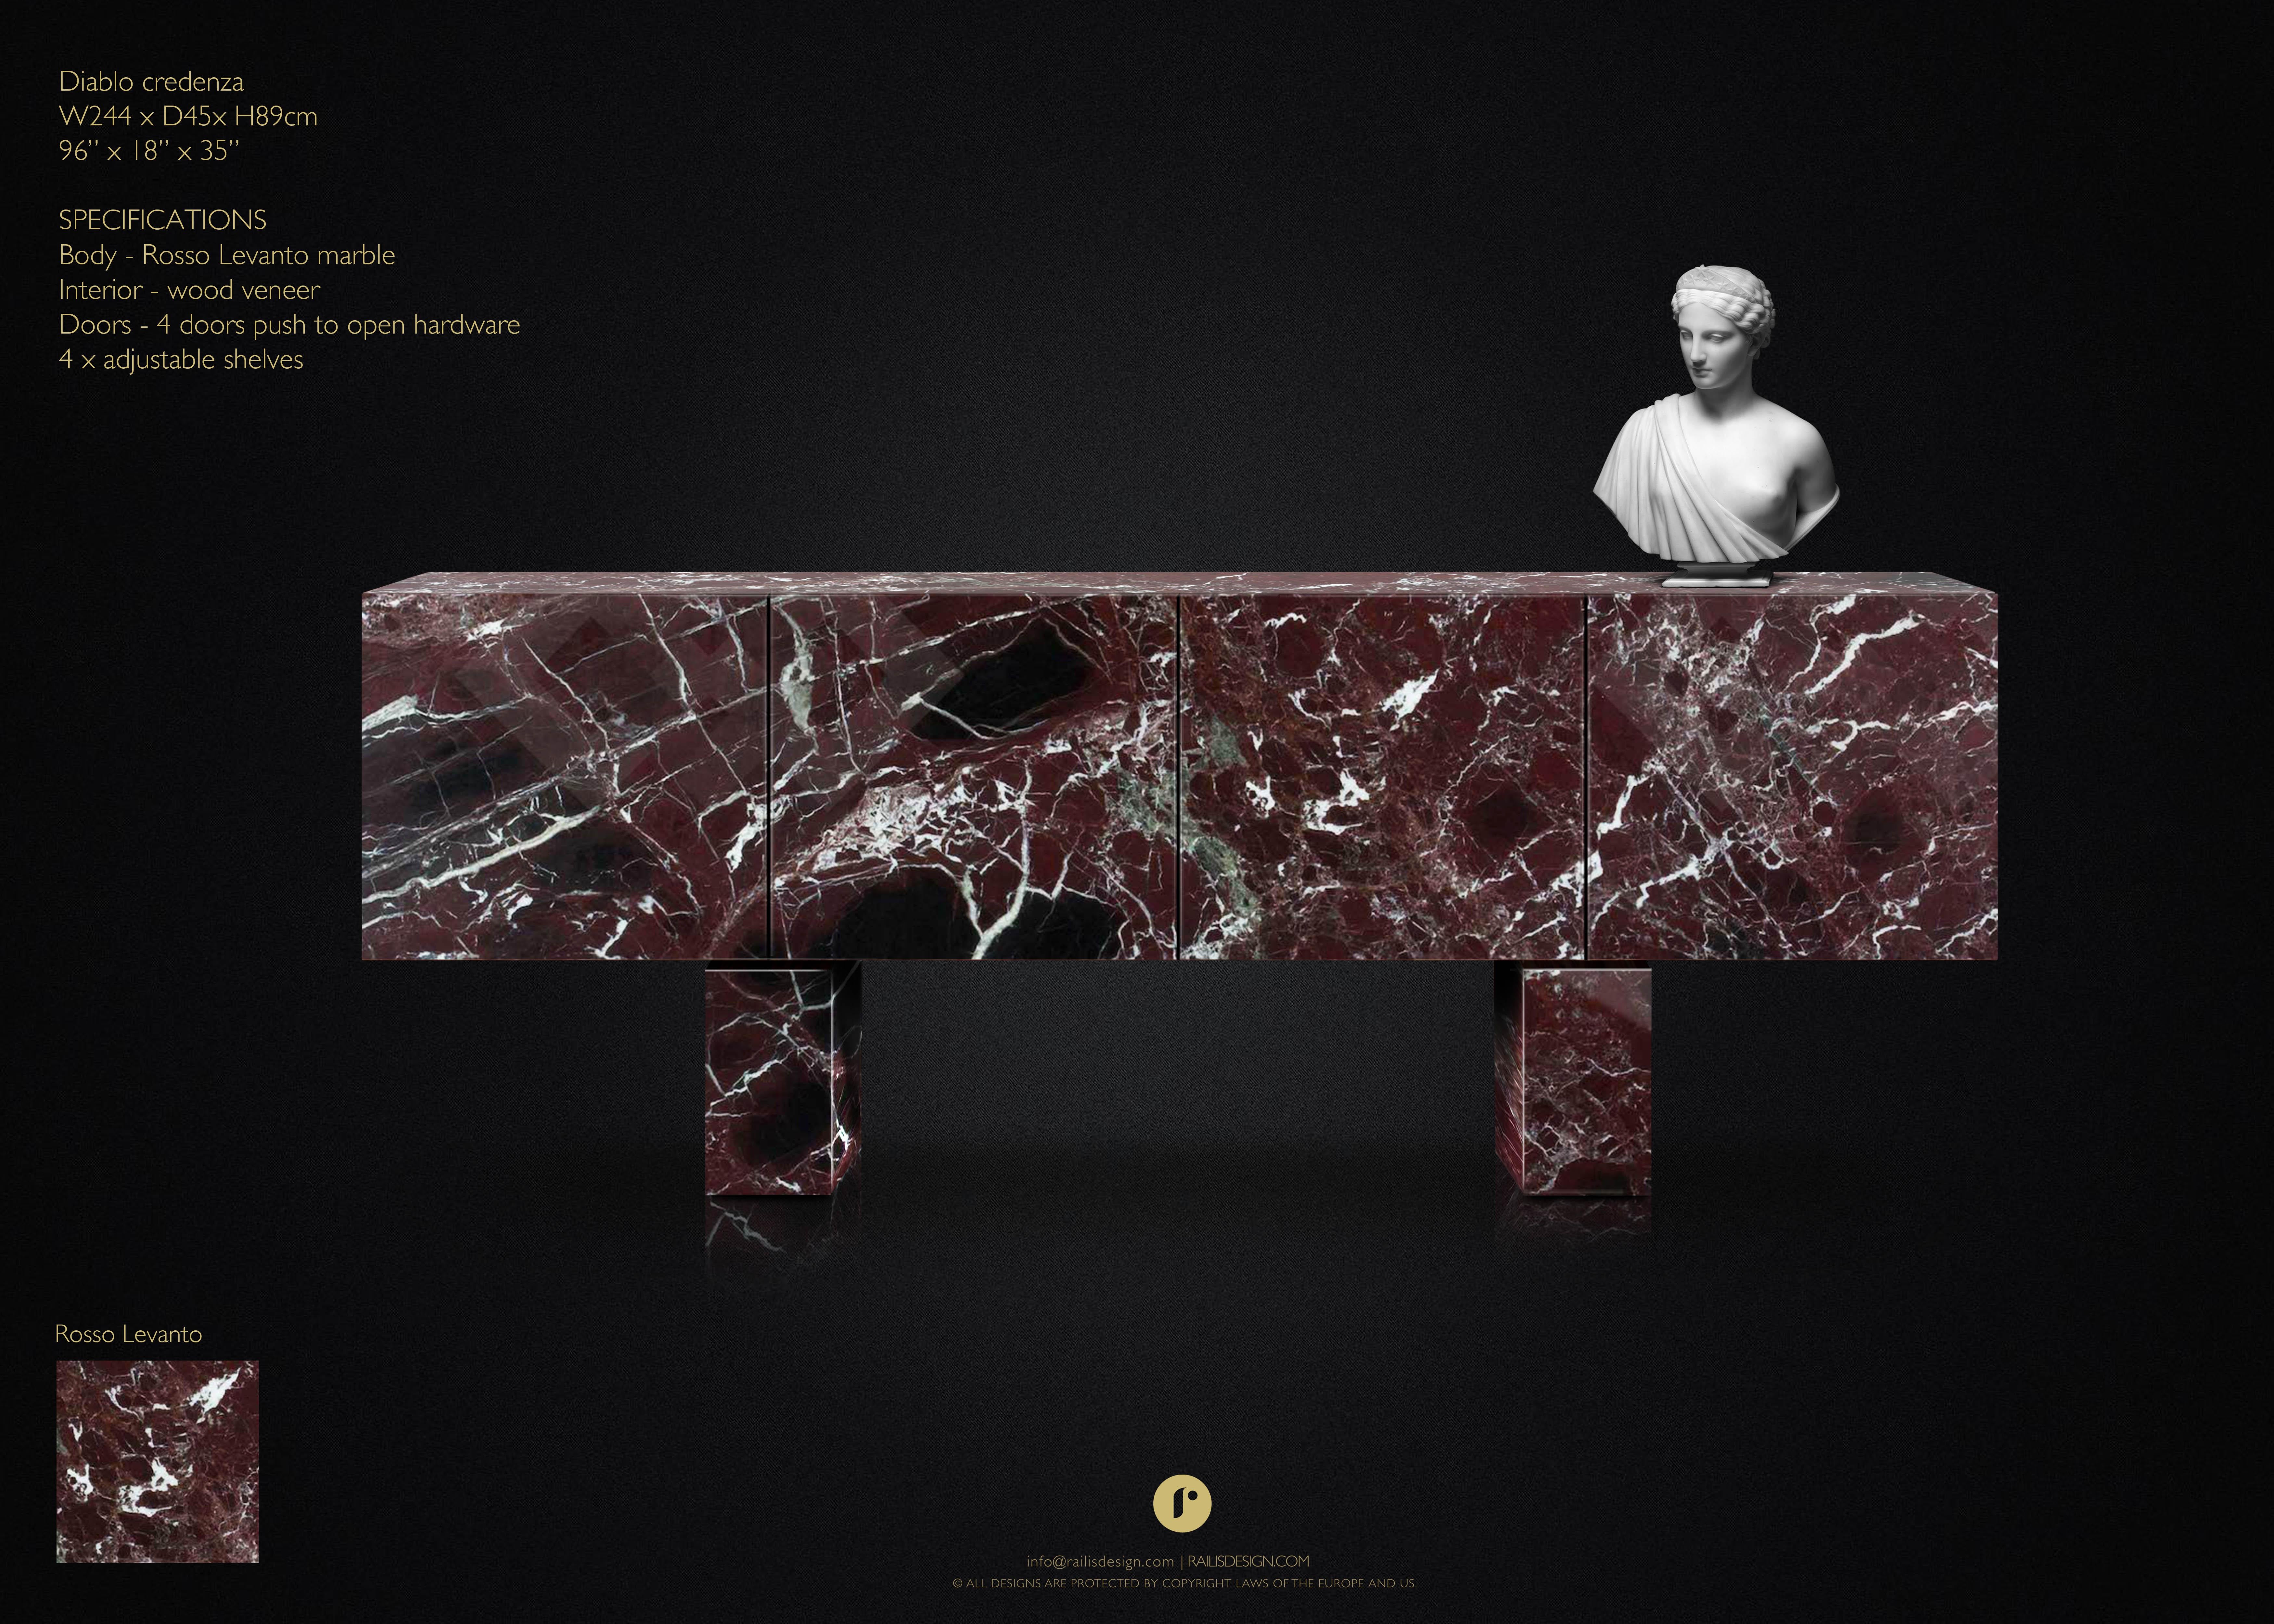 The Contemporary Diablo sideboard is a true masterpiece of modern furniture design. Crafted from rare Rosso Levanto marble sourced from Italy, this sideboard is a stunning example of the beauty of natural stone. The exterior of the sideboard is